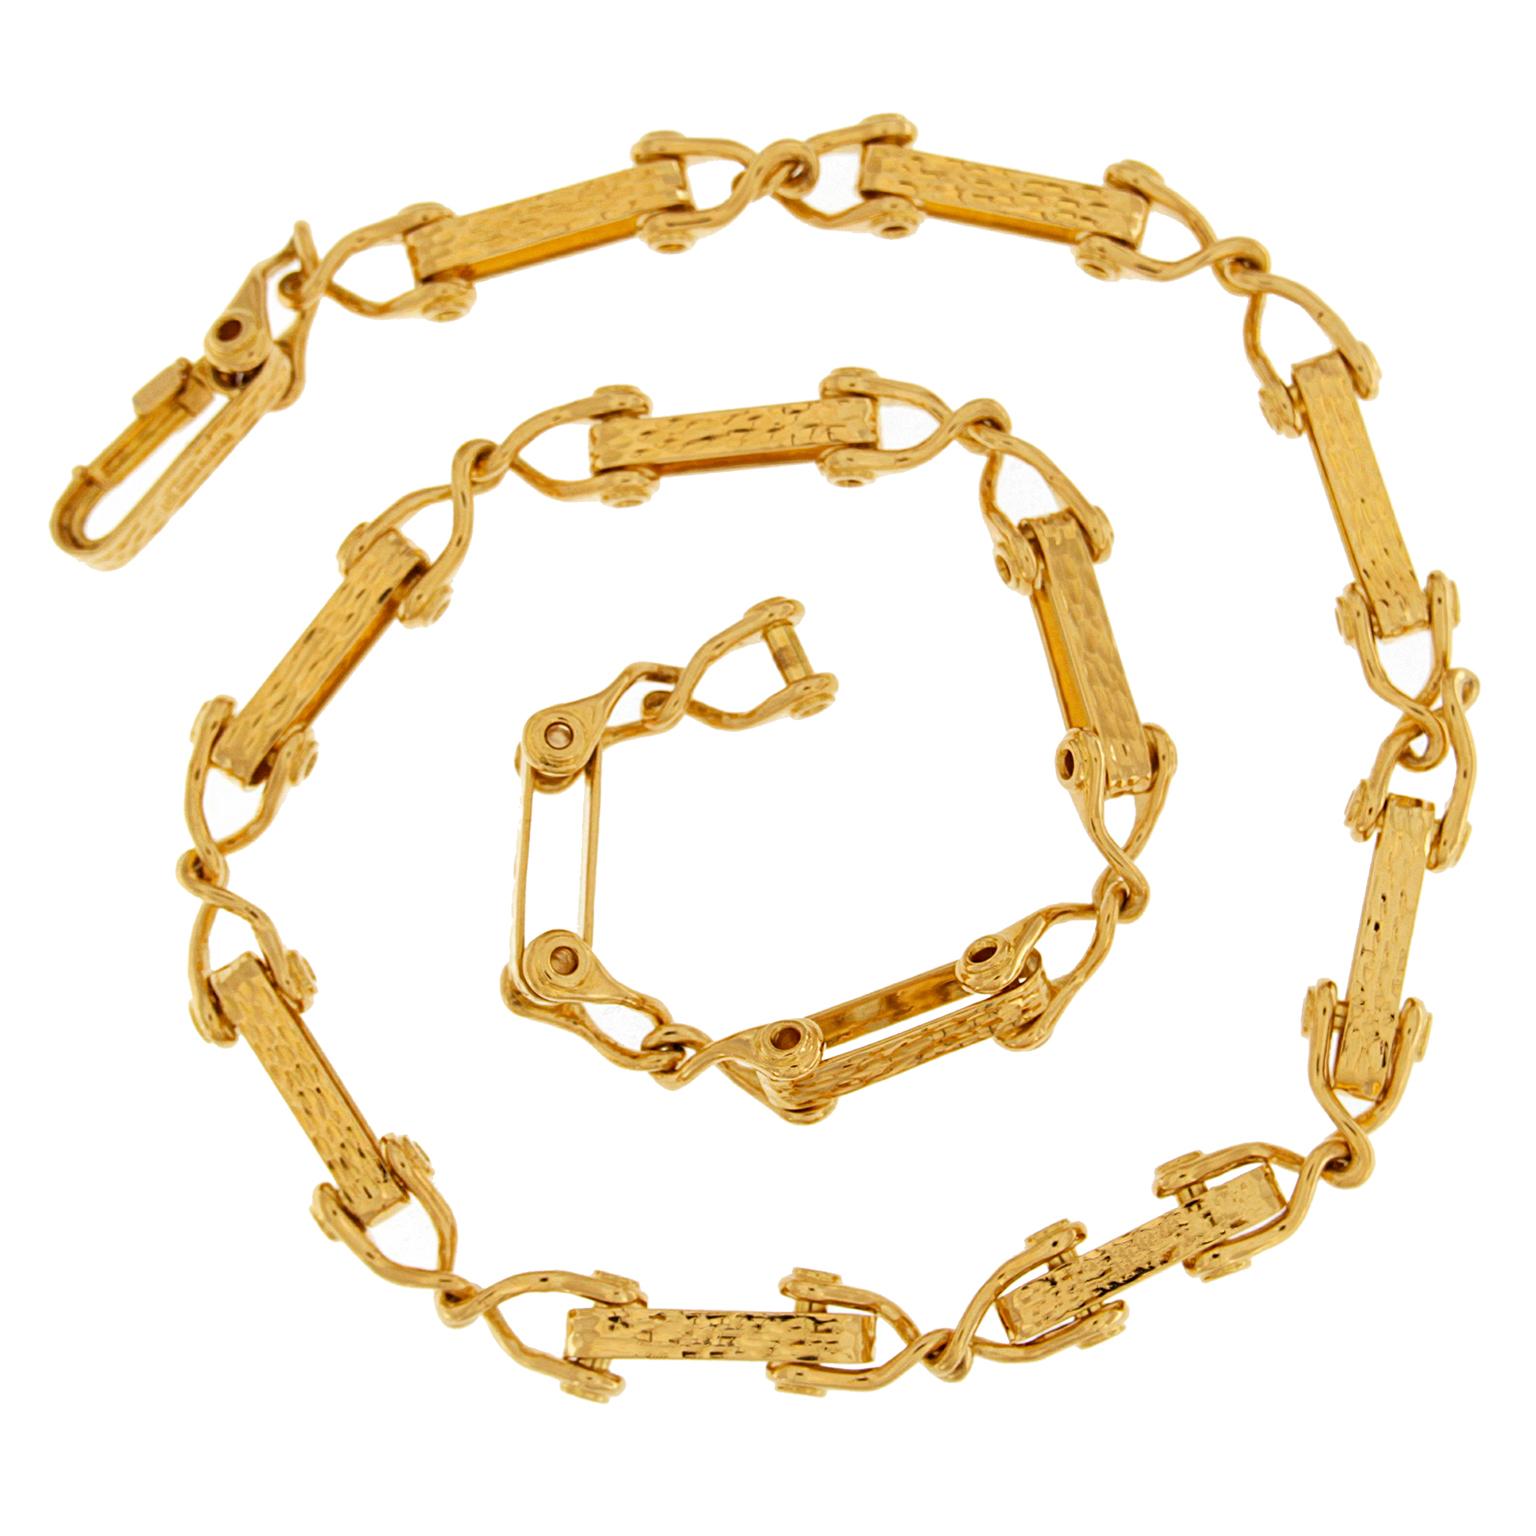 Valentin Magro Cleat Textured Gold Necklace is made of elongated links. The material of choice is 18k yellow gold shaped into cleat style plates with textured surfaces. Horseshoe links attach to each end on the cleats, transforming separate elements